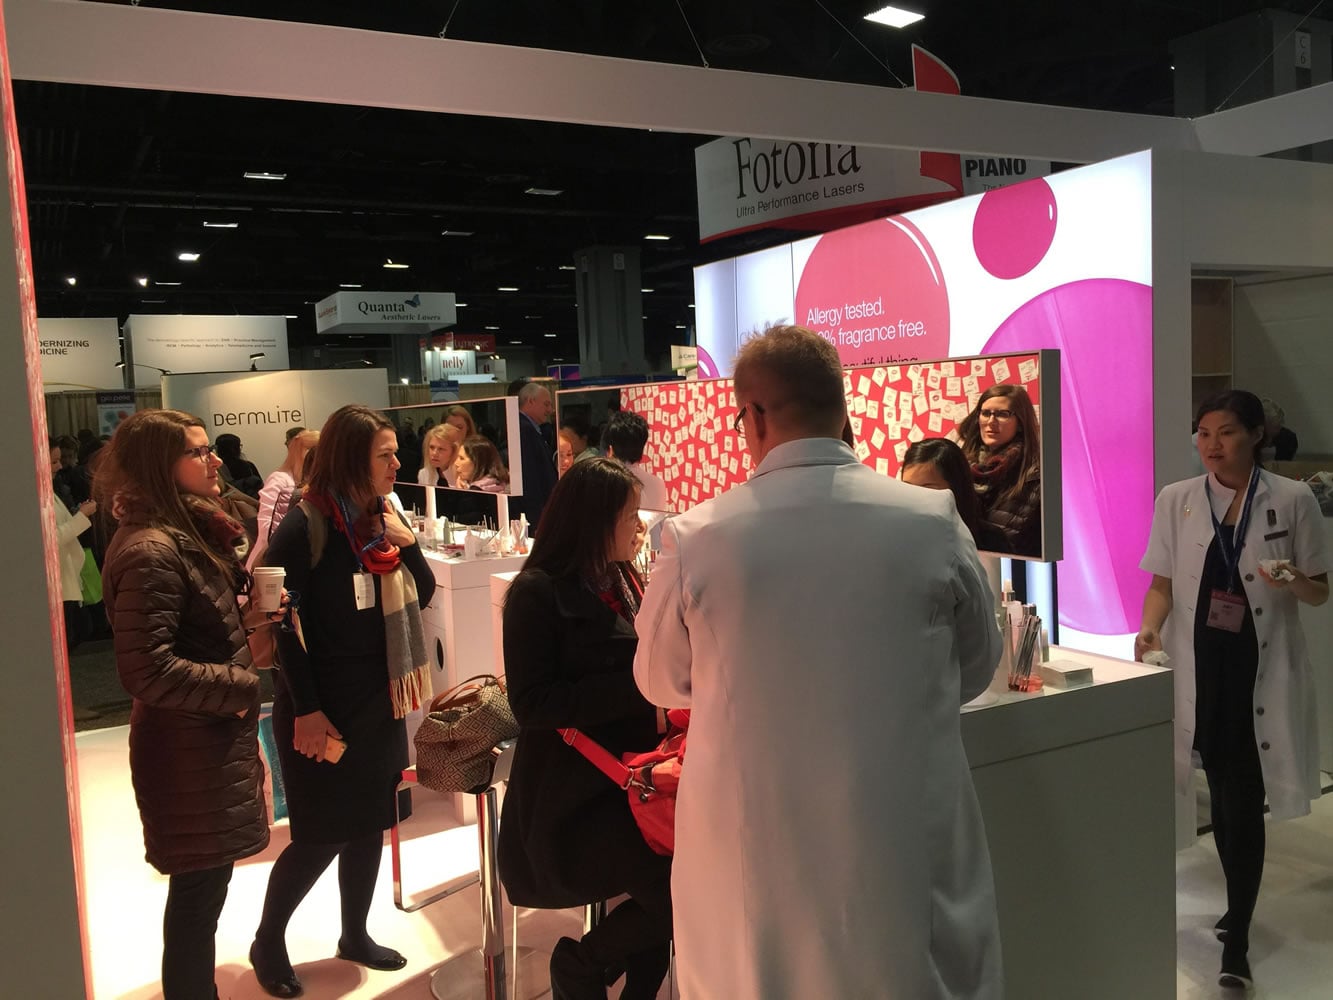 At the Clinique booth at the American Academy of Dermatology meeting, held at the Walter E. Washington Convention Center in Washington earlier this month, visitors get lipstick applied.